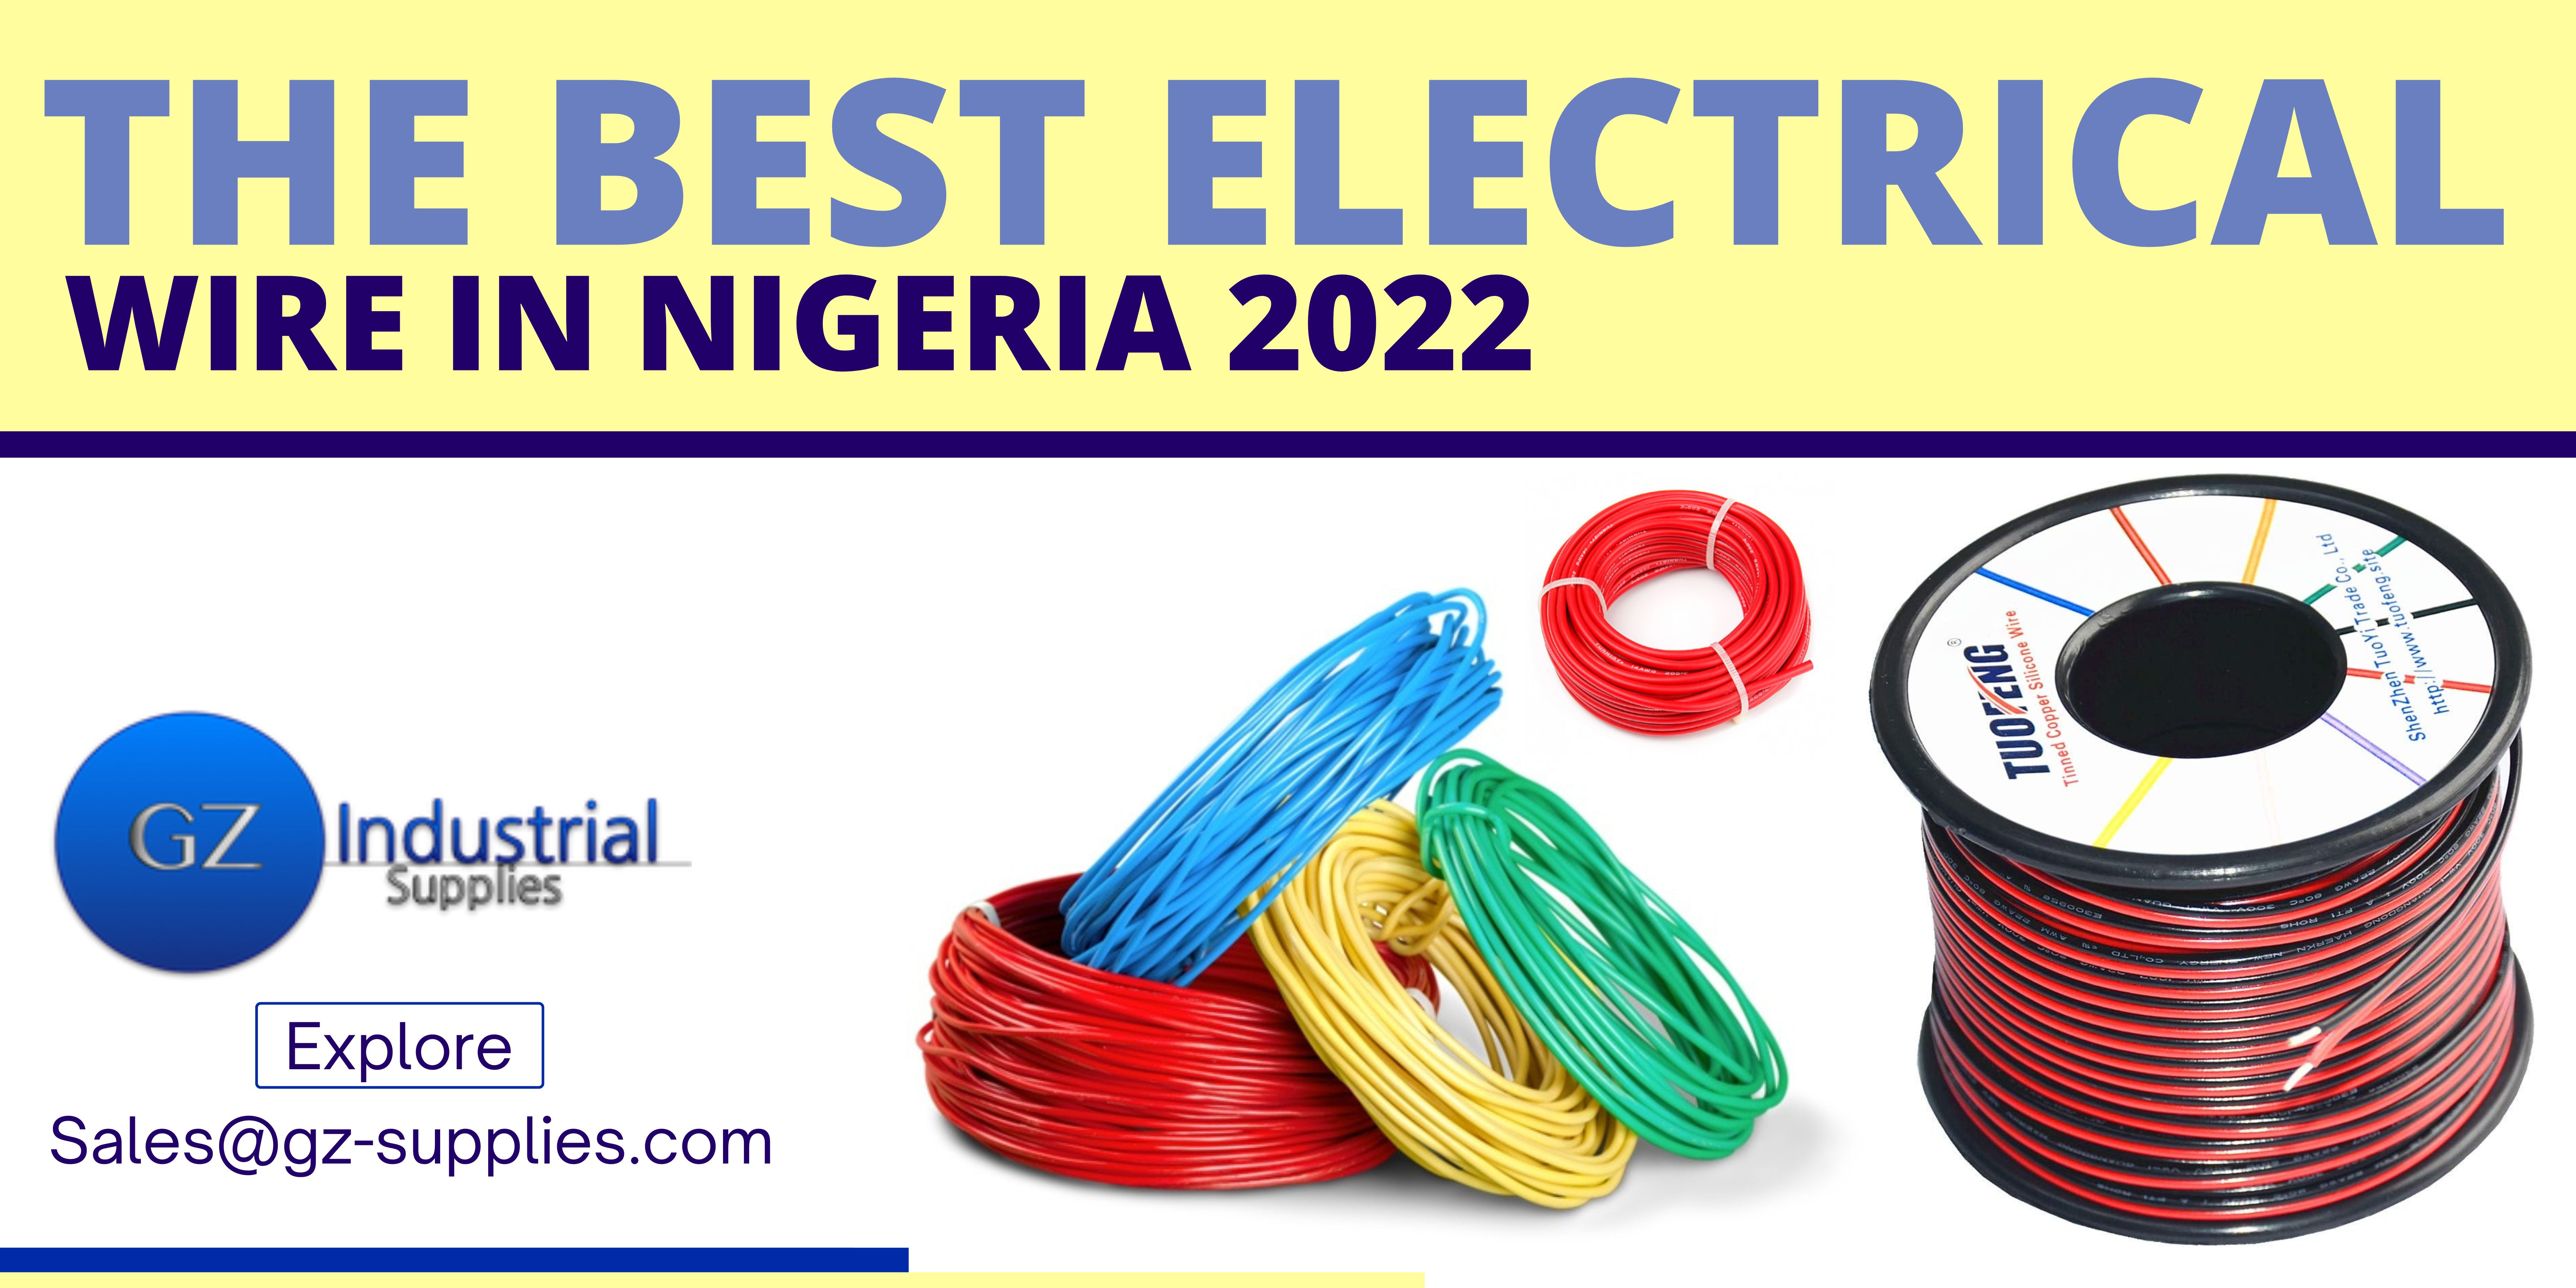 The Best Electrical Wire in Nigeria 2022 - GZ Industrial Supplies